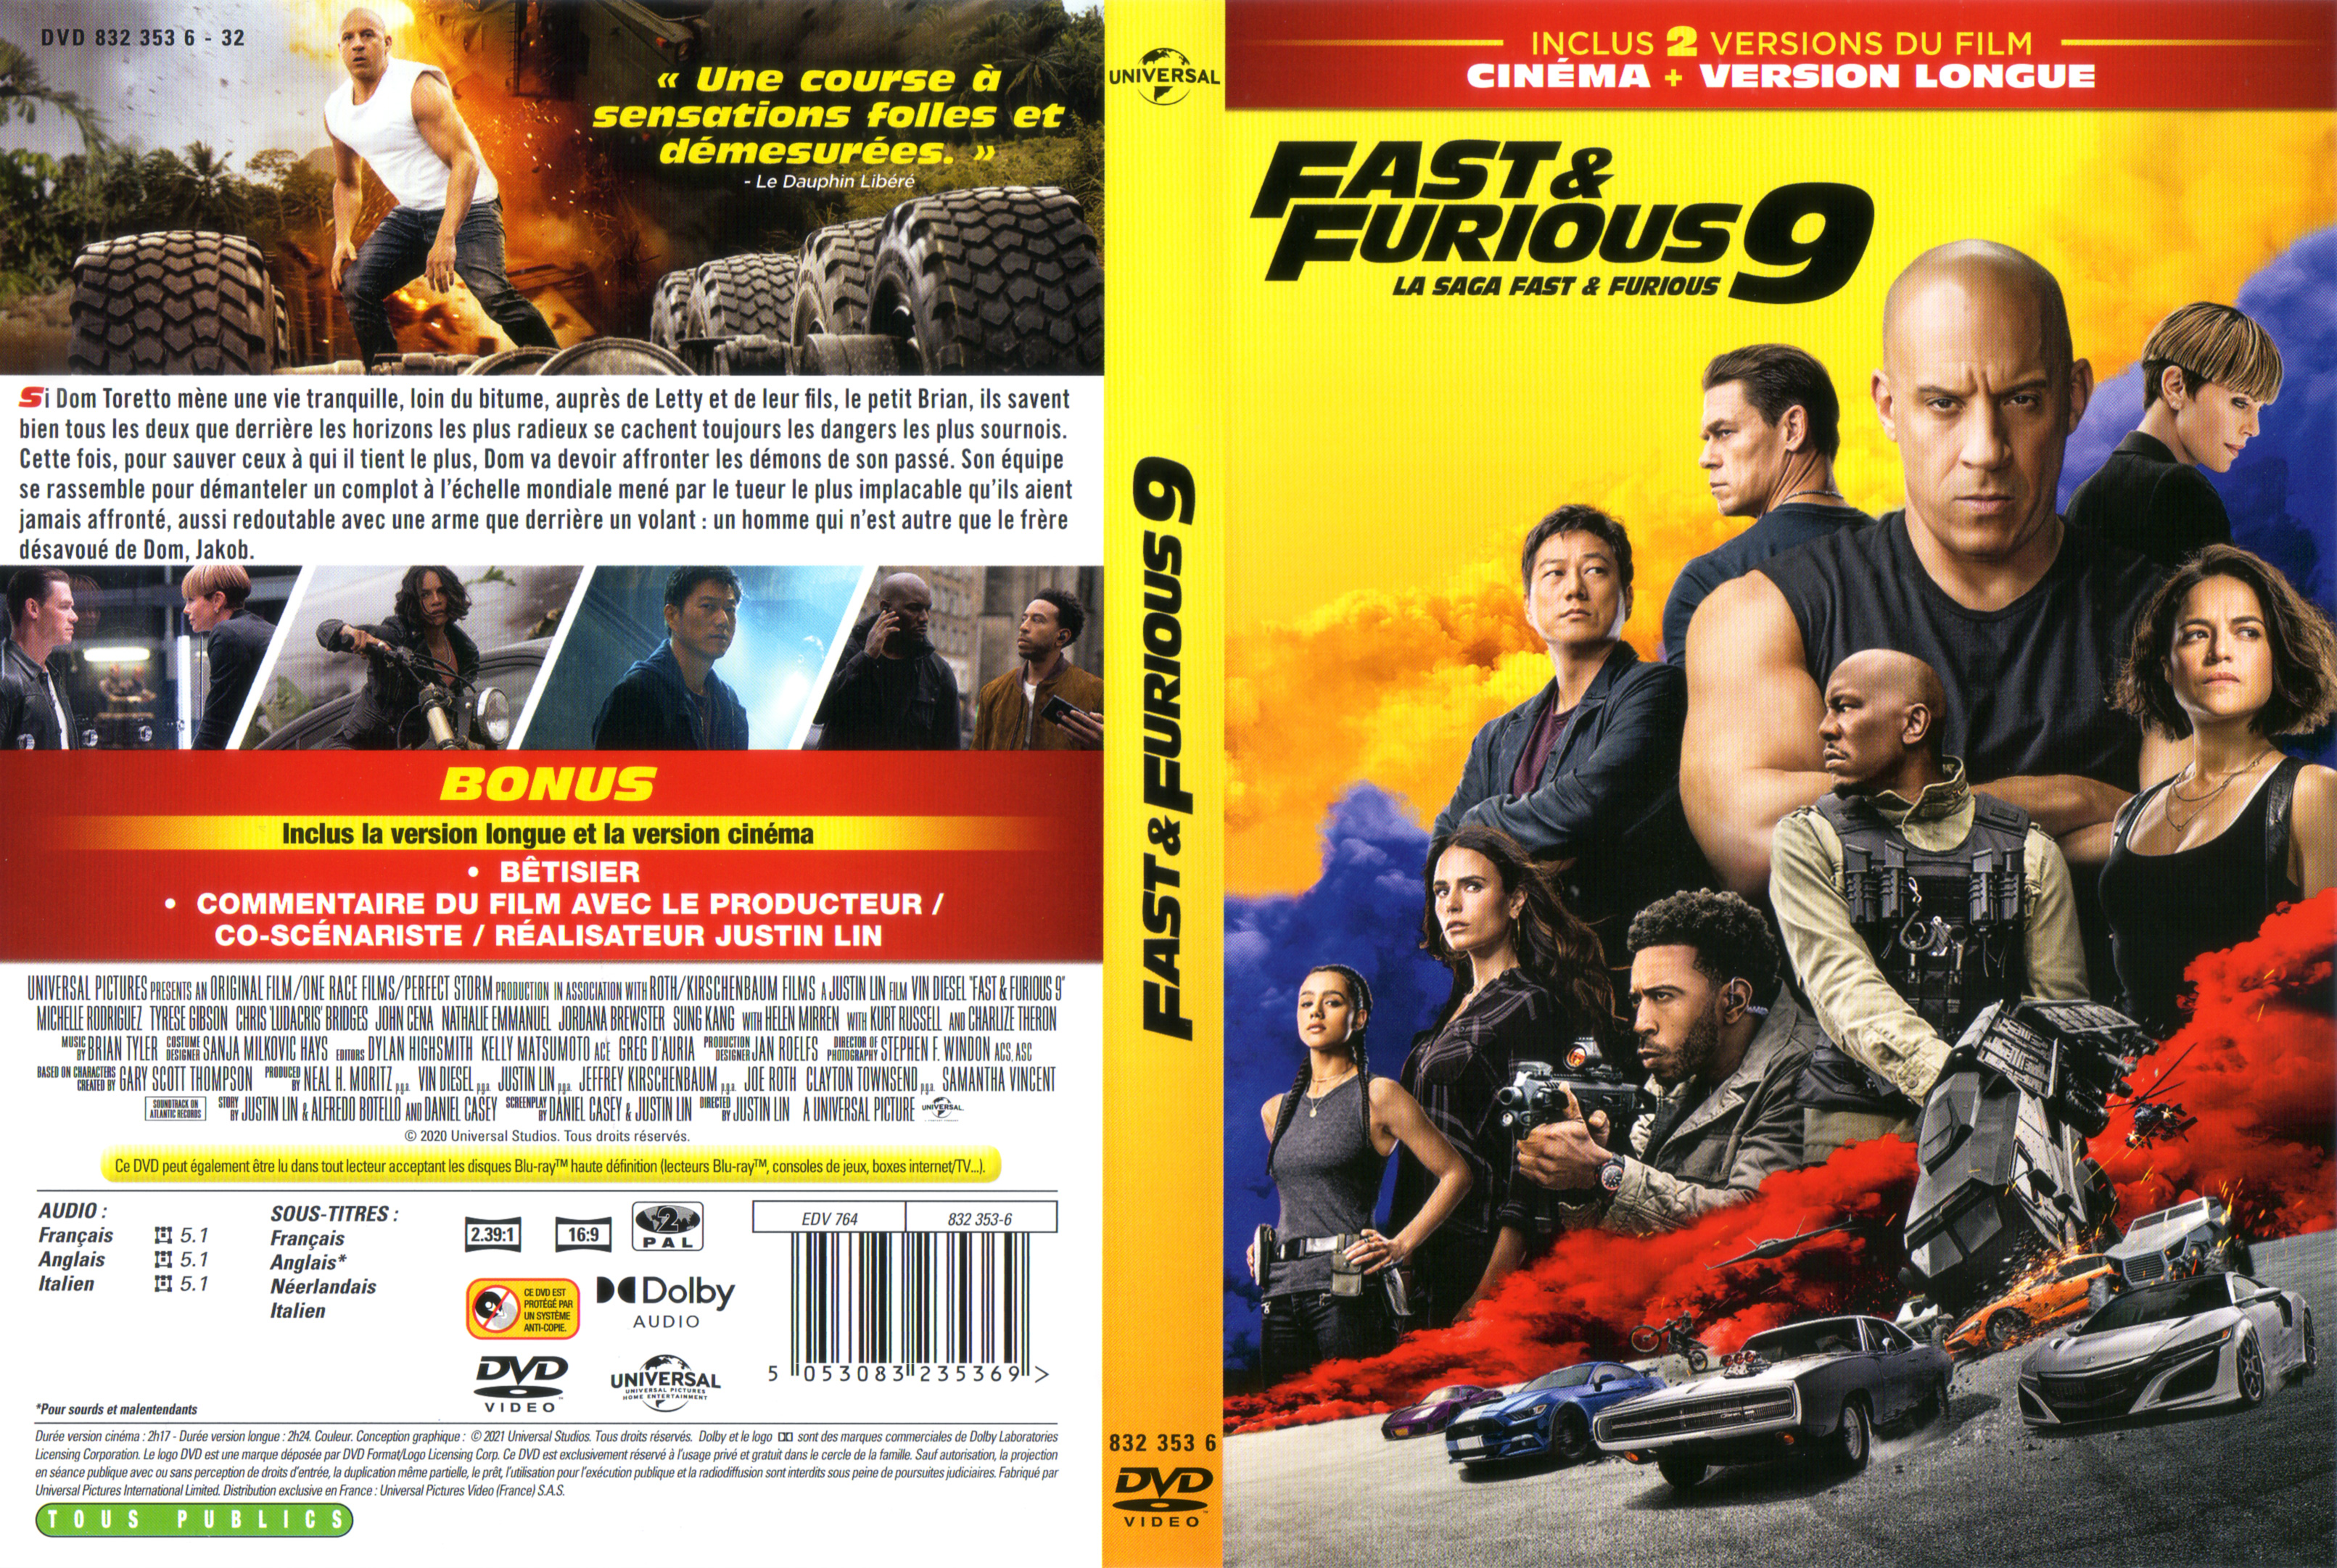 Jaquette DVD Fast & furious 9